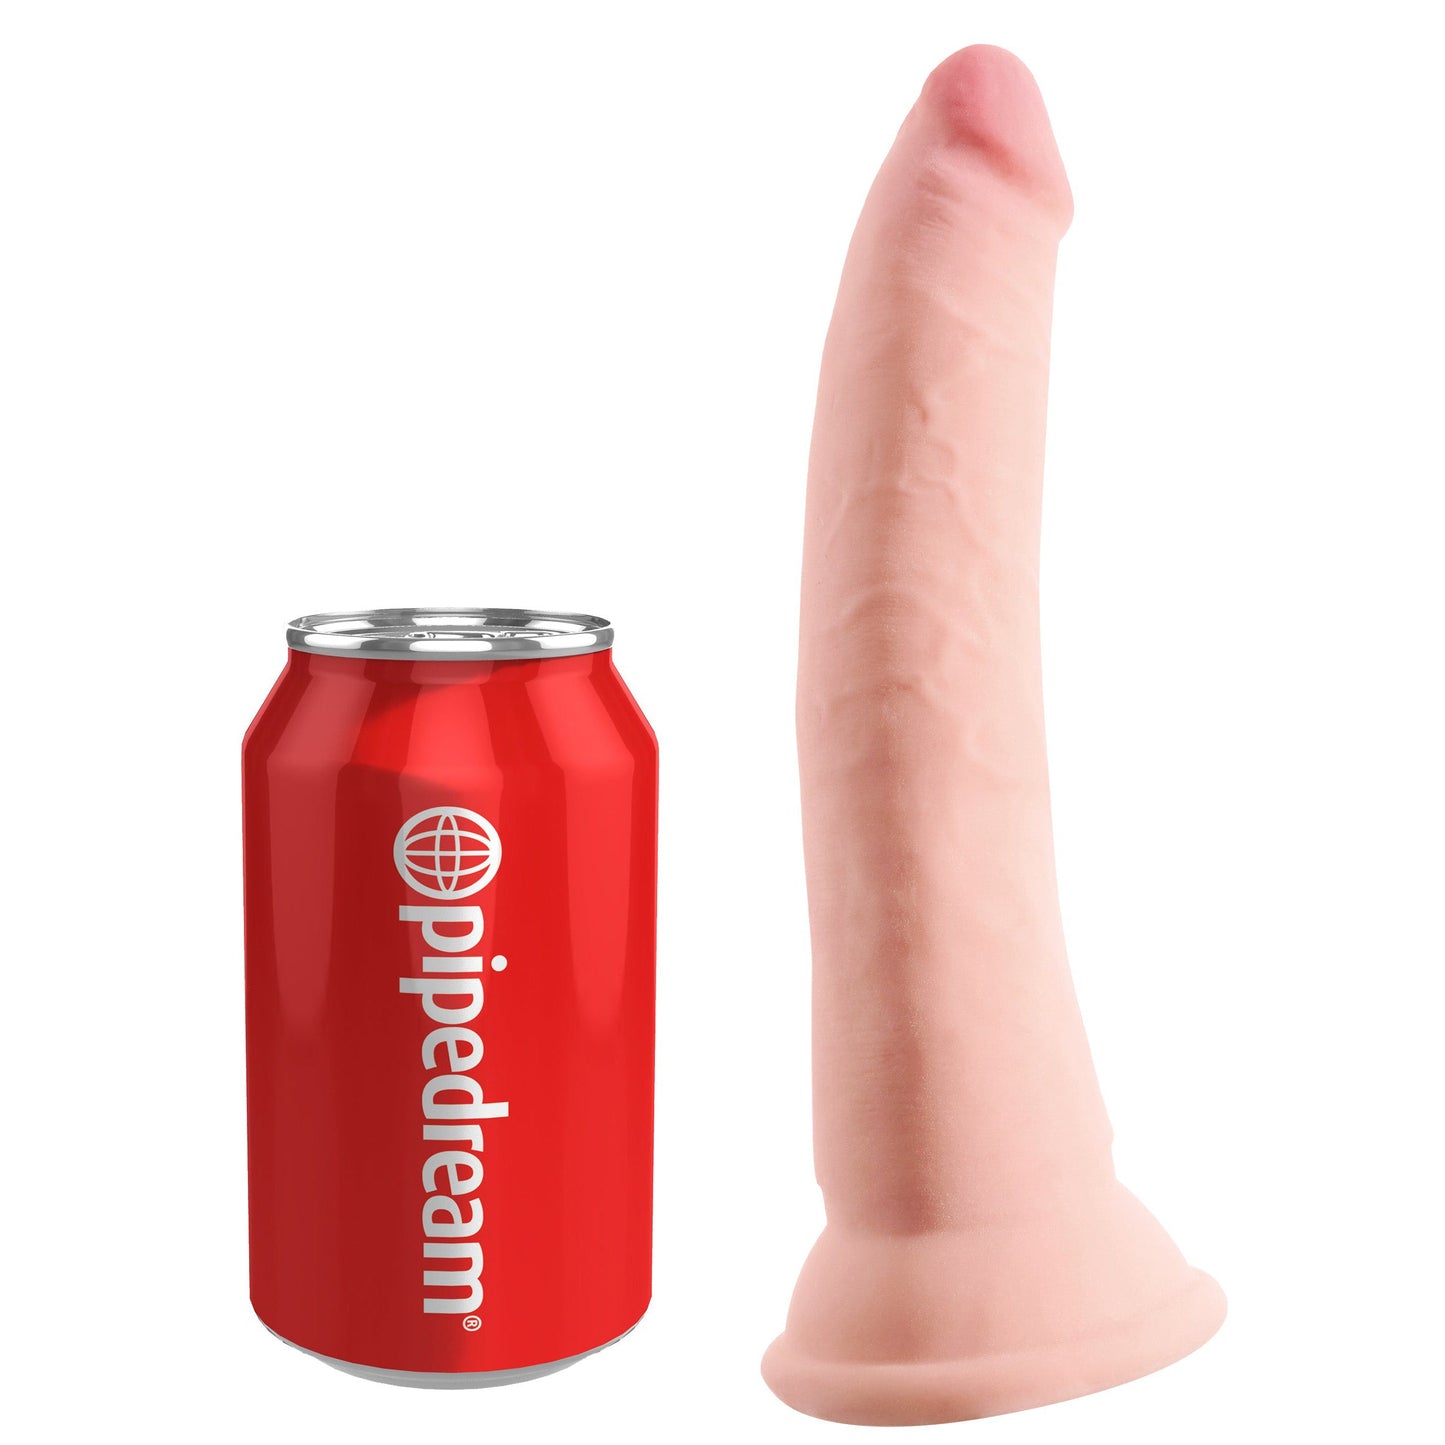 King Cock Plus 7" Triple Density Cock - Light - Thorn & Feather Sex Toy Canada